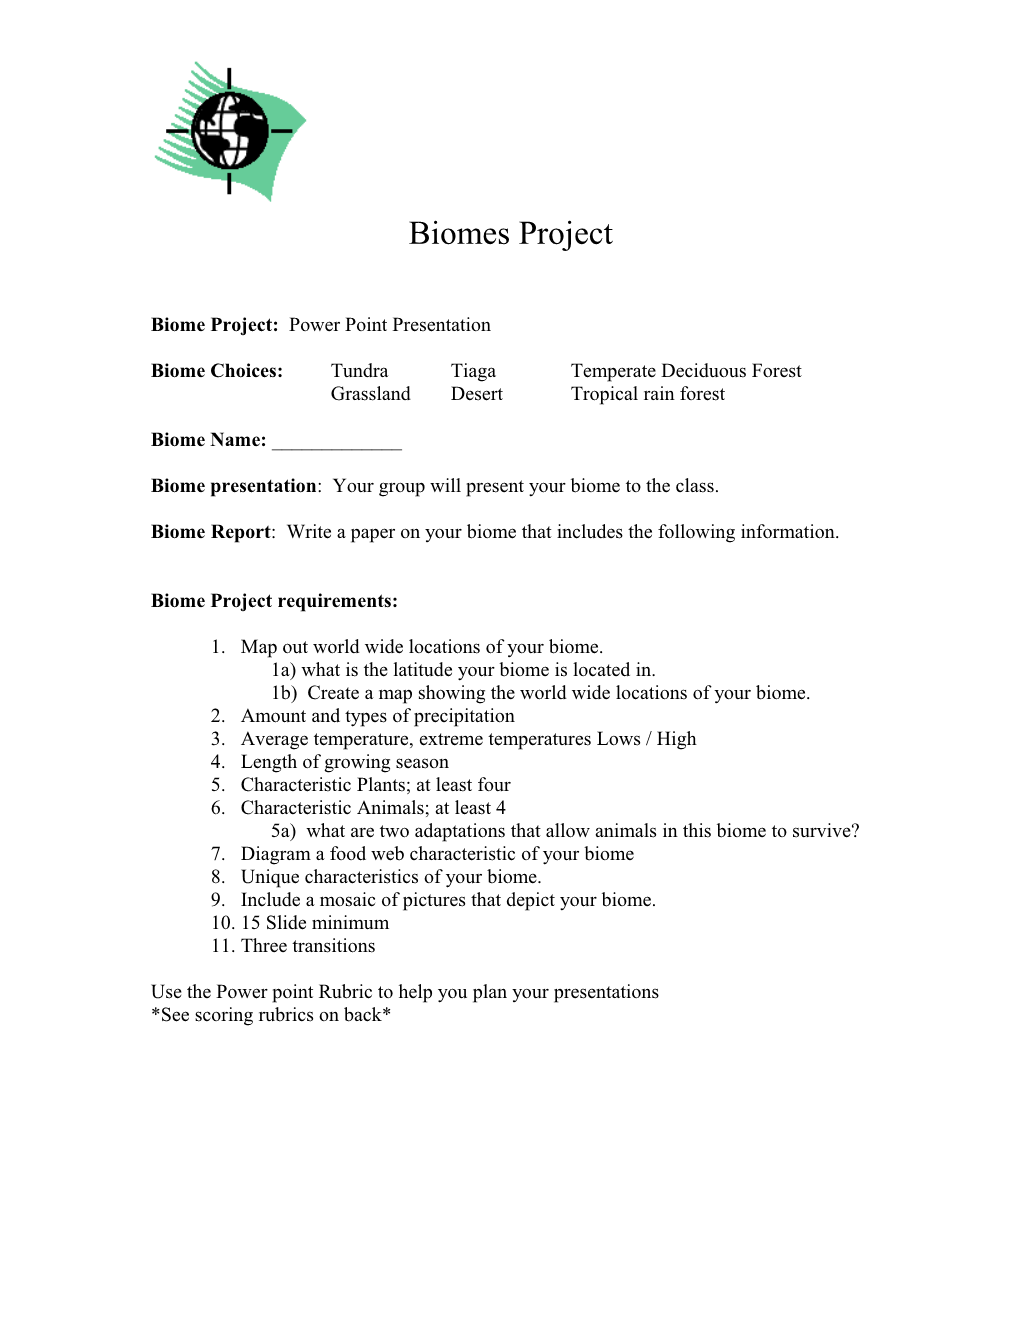 Biome Project: Power Point Presentation